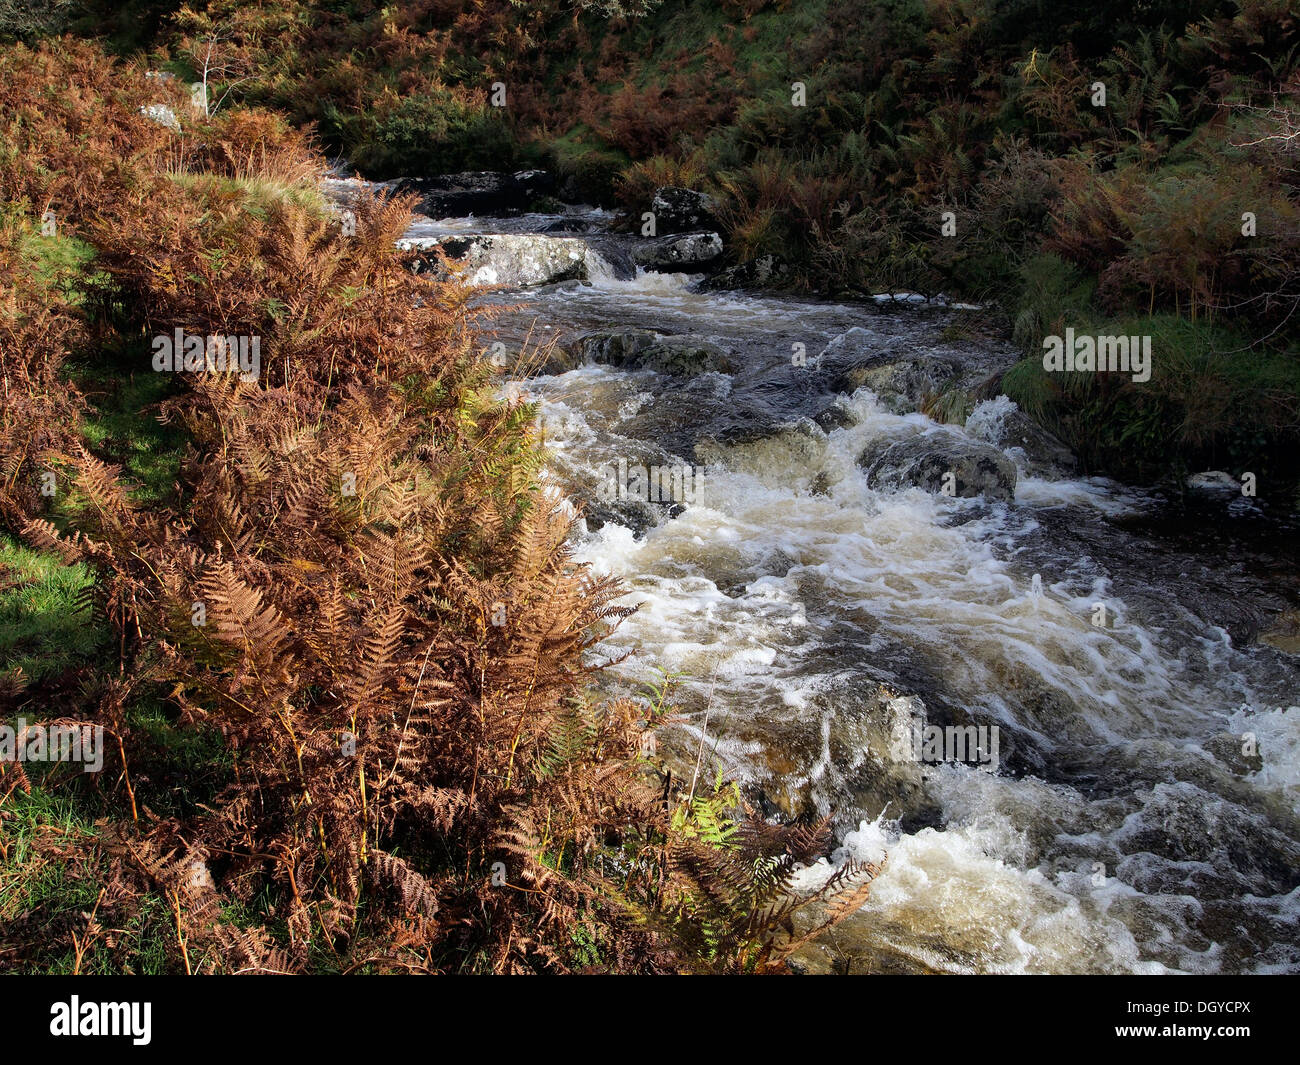 Upper course of the River Lyd below its source on Dartmoor. A typical moorland stream in its youthful stage after heavy rain. Stock Photo